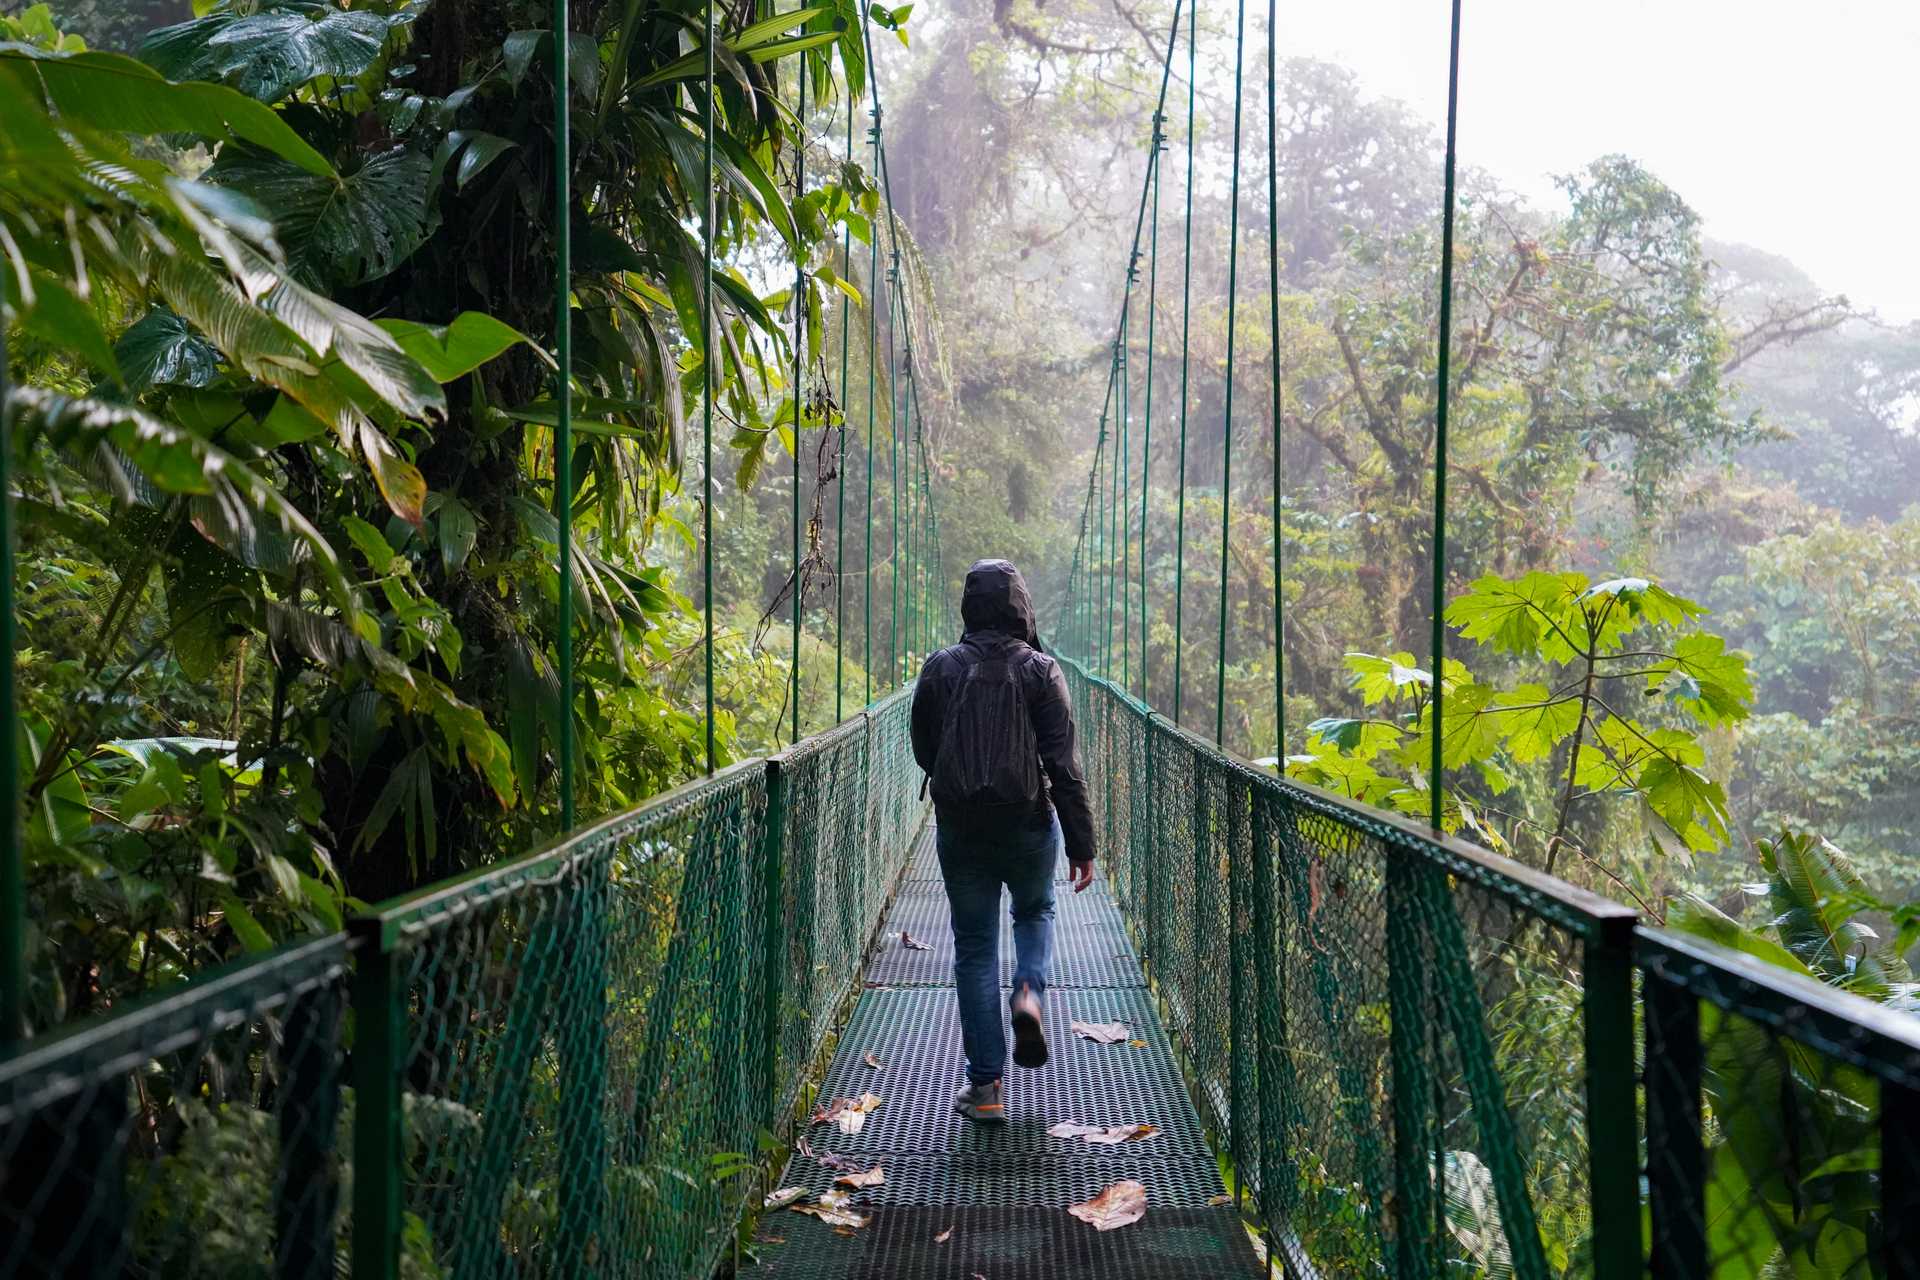 A person walking on a hanging bridge in the rainforest